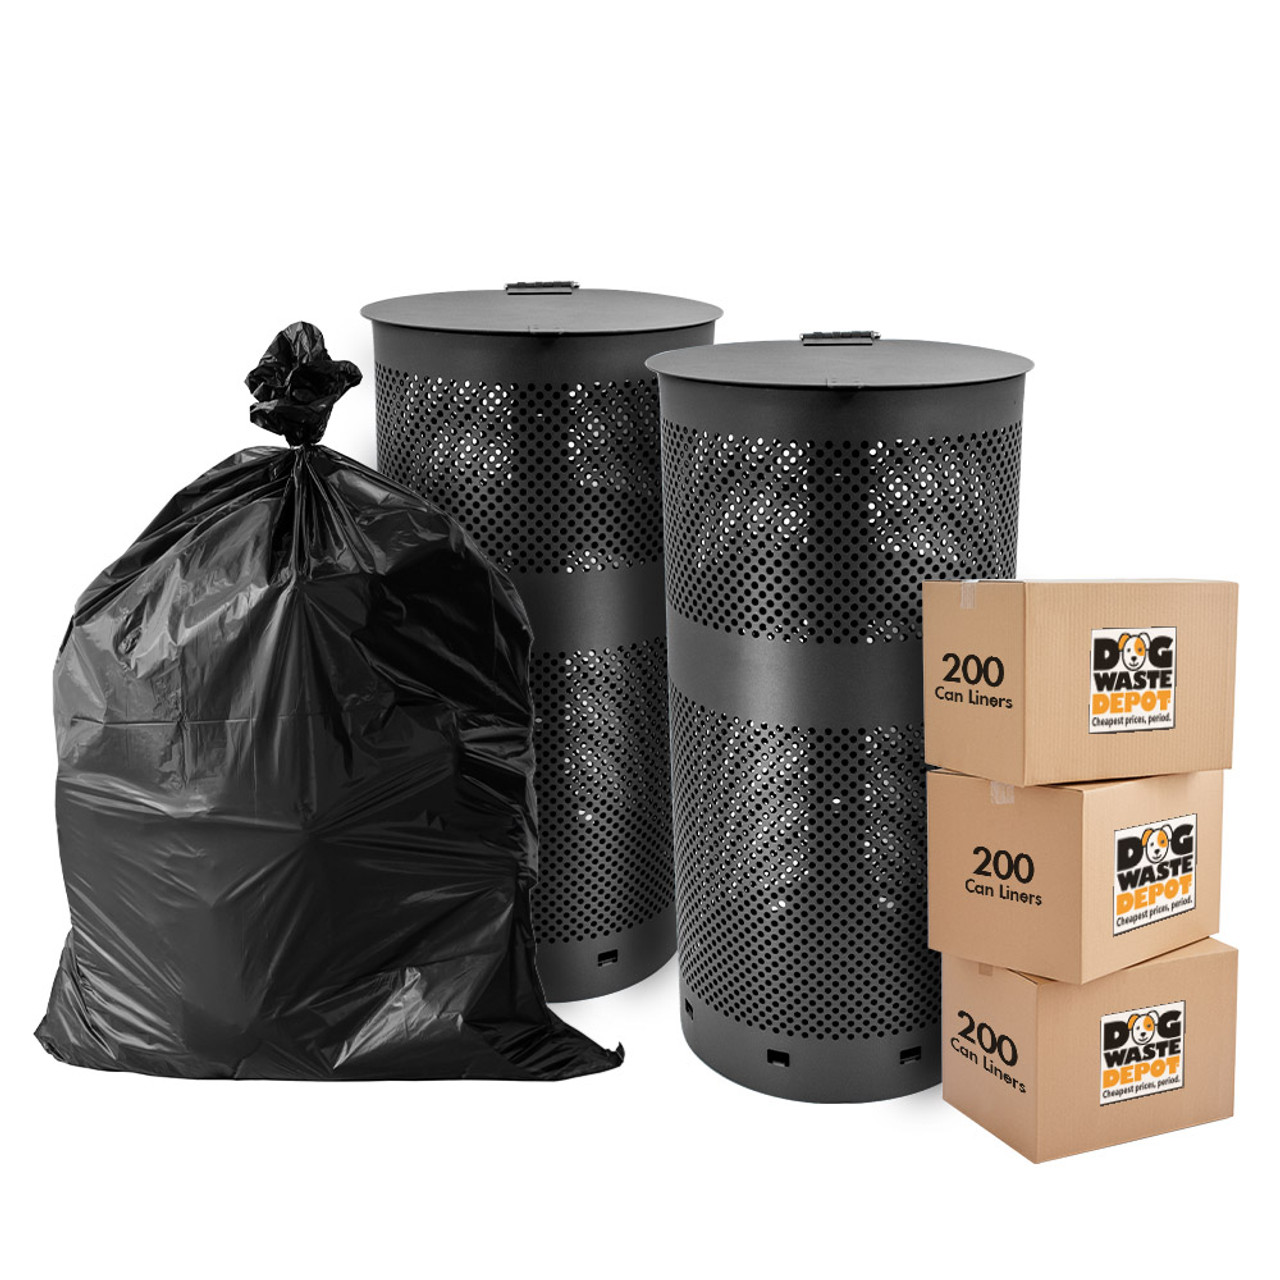 Bundle -Waste Cans & Liners